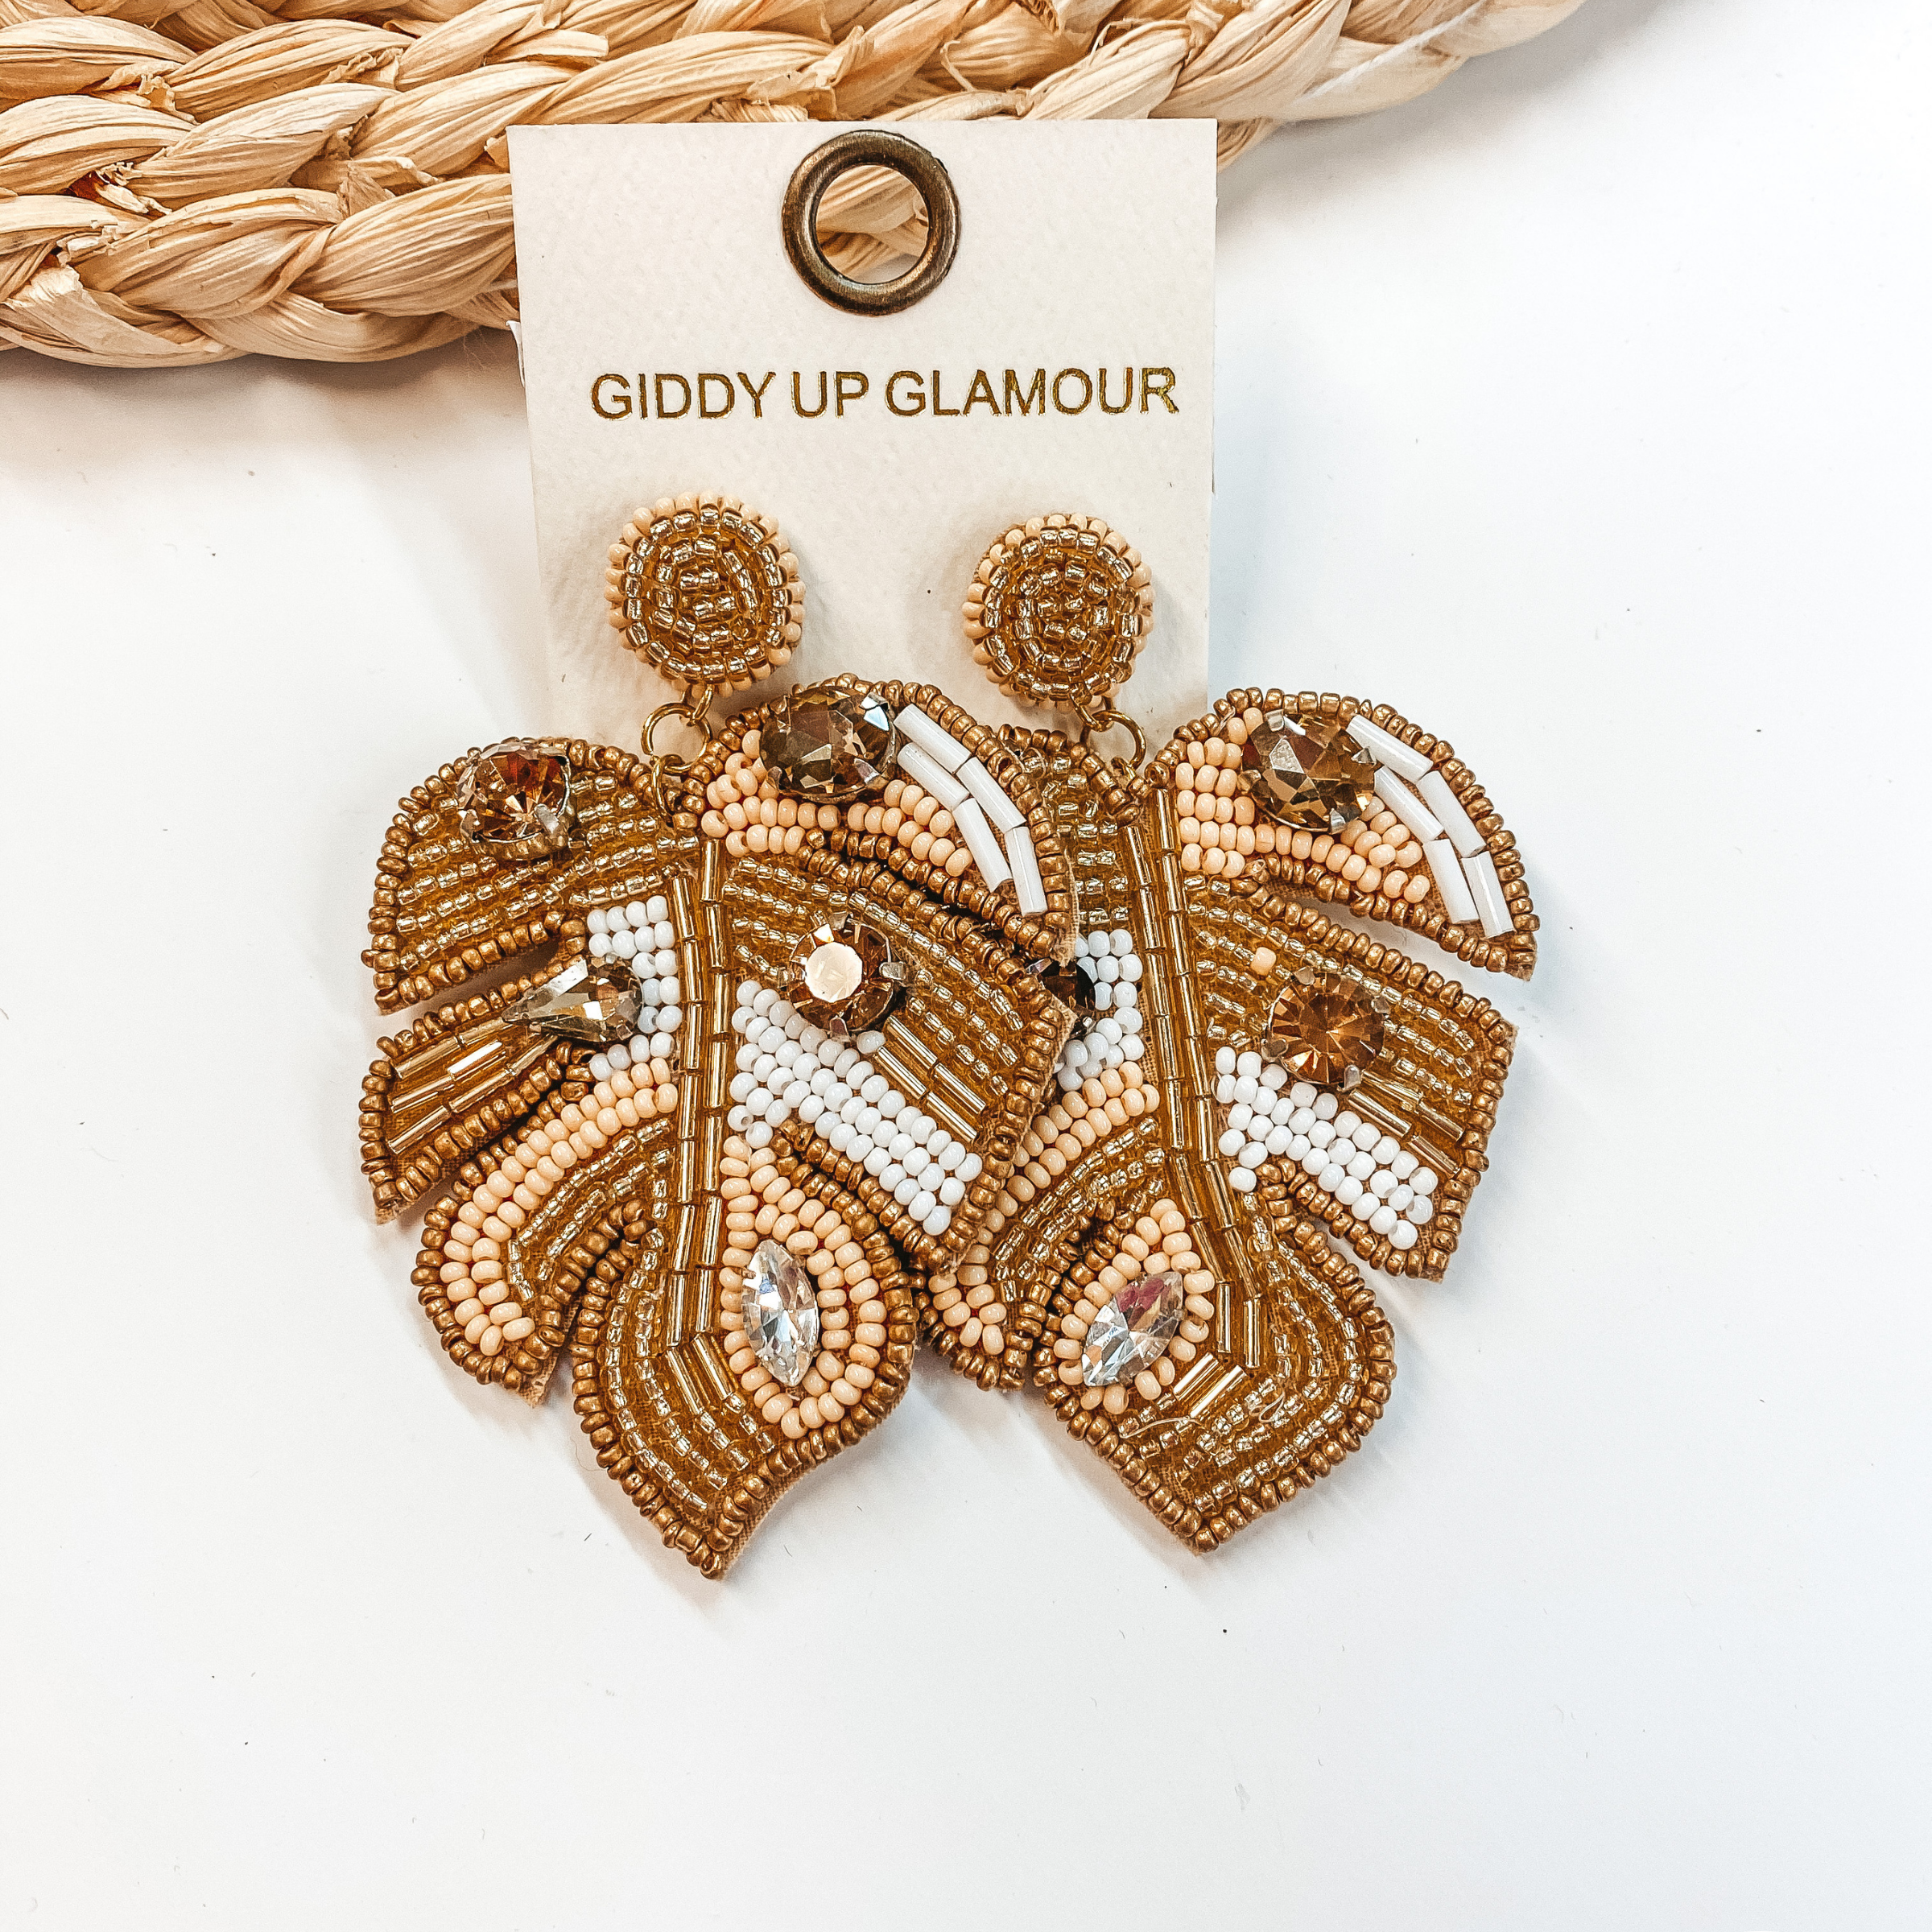 Palm Leaf Beaded Earrings With Crystal Accents in Gold and White - Giddy Up Glamour Boutique